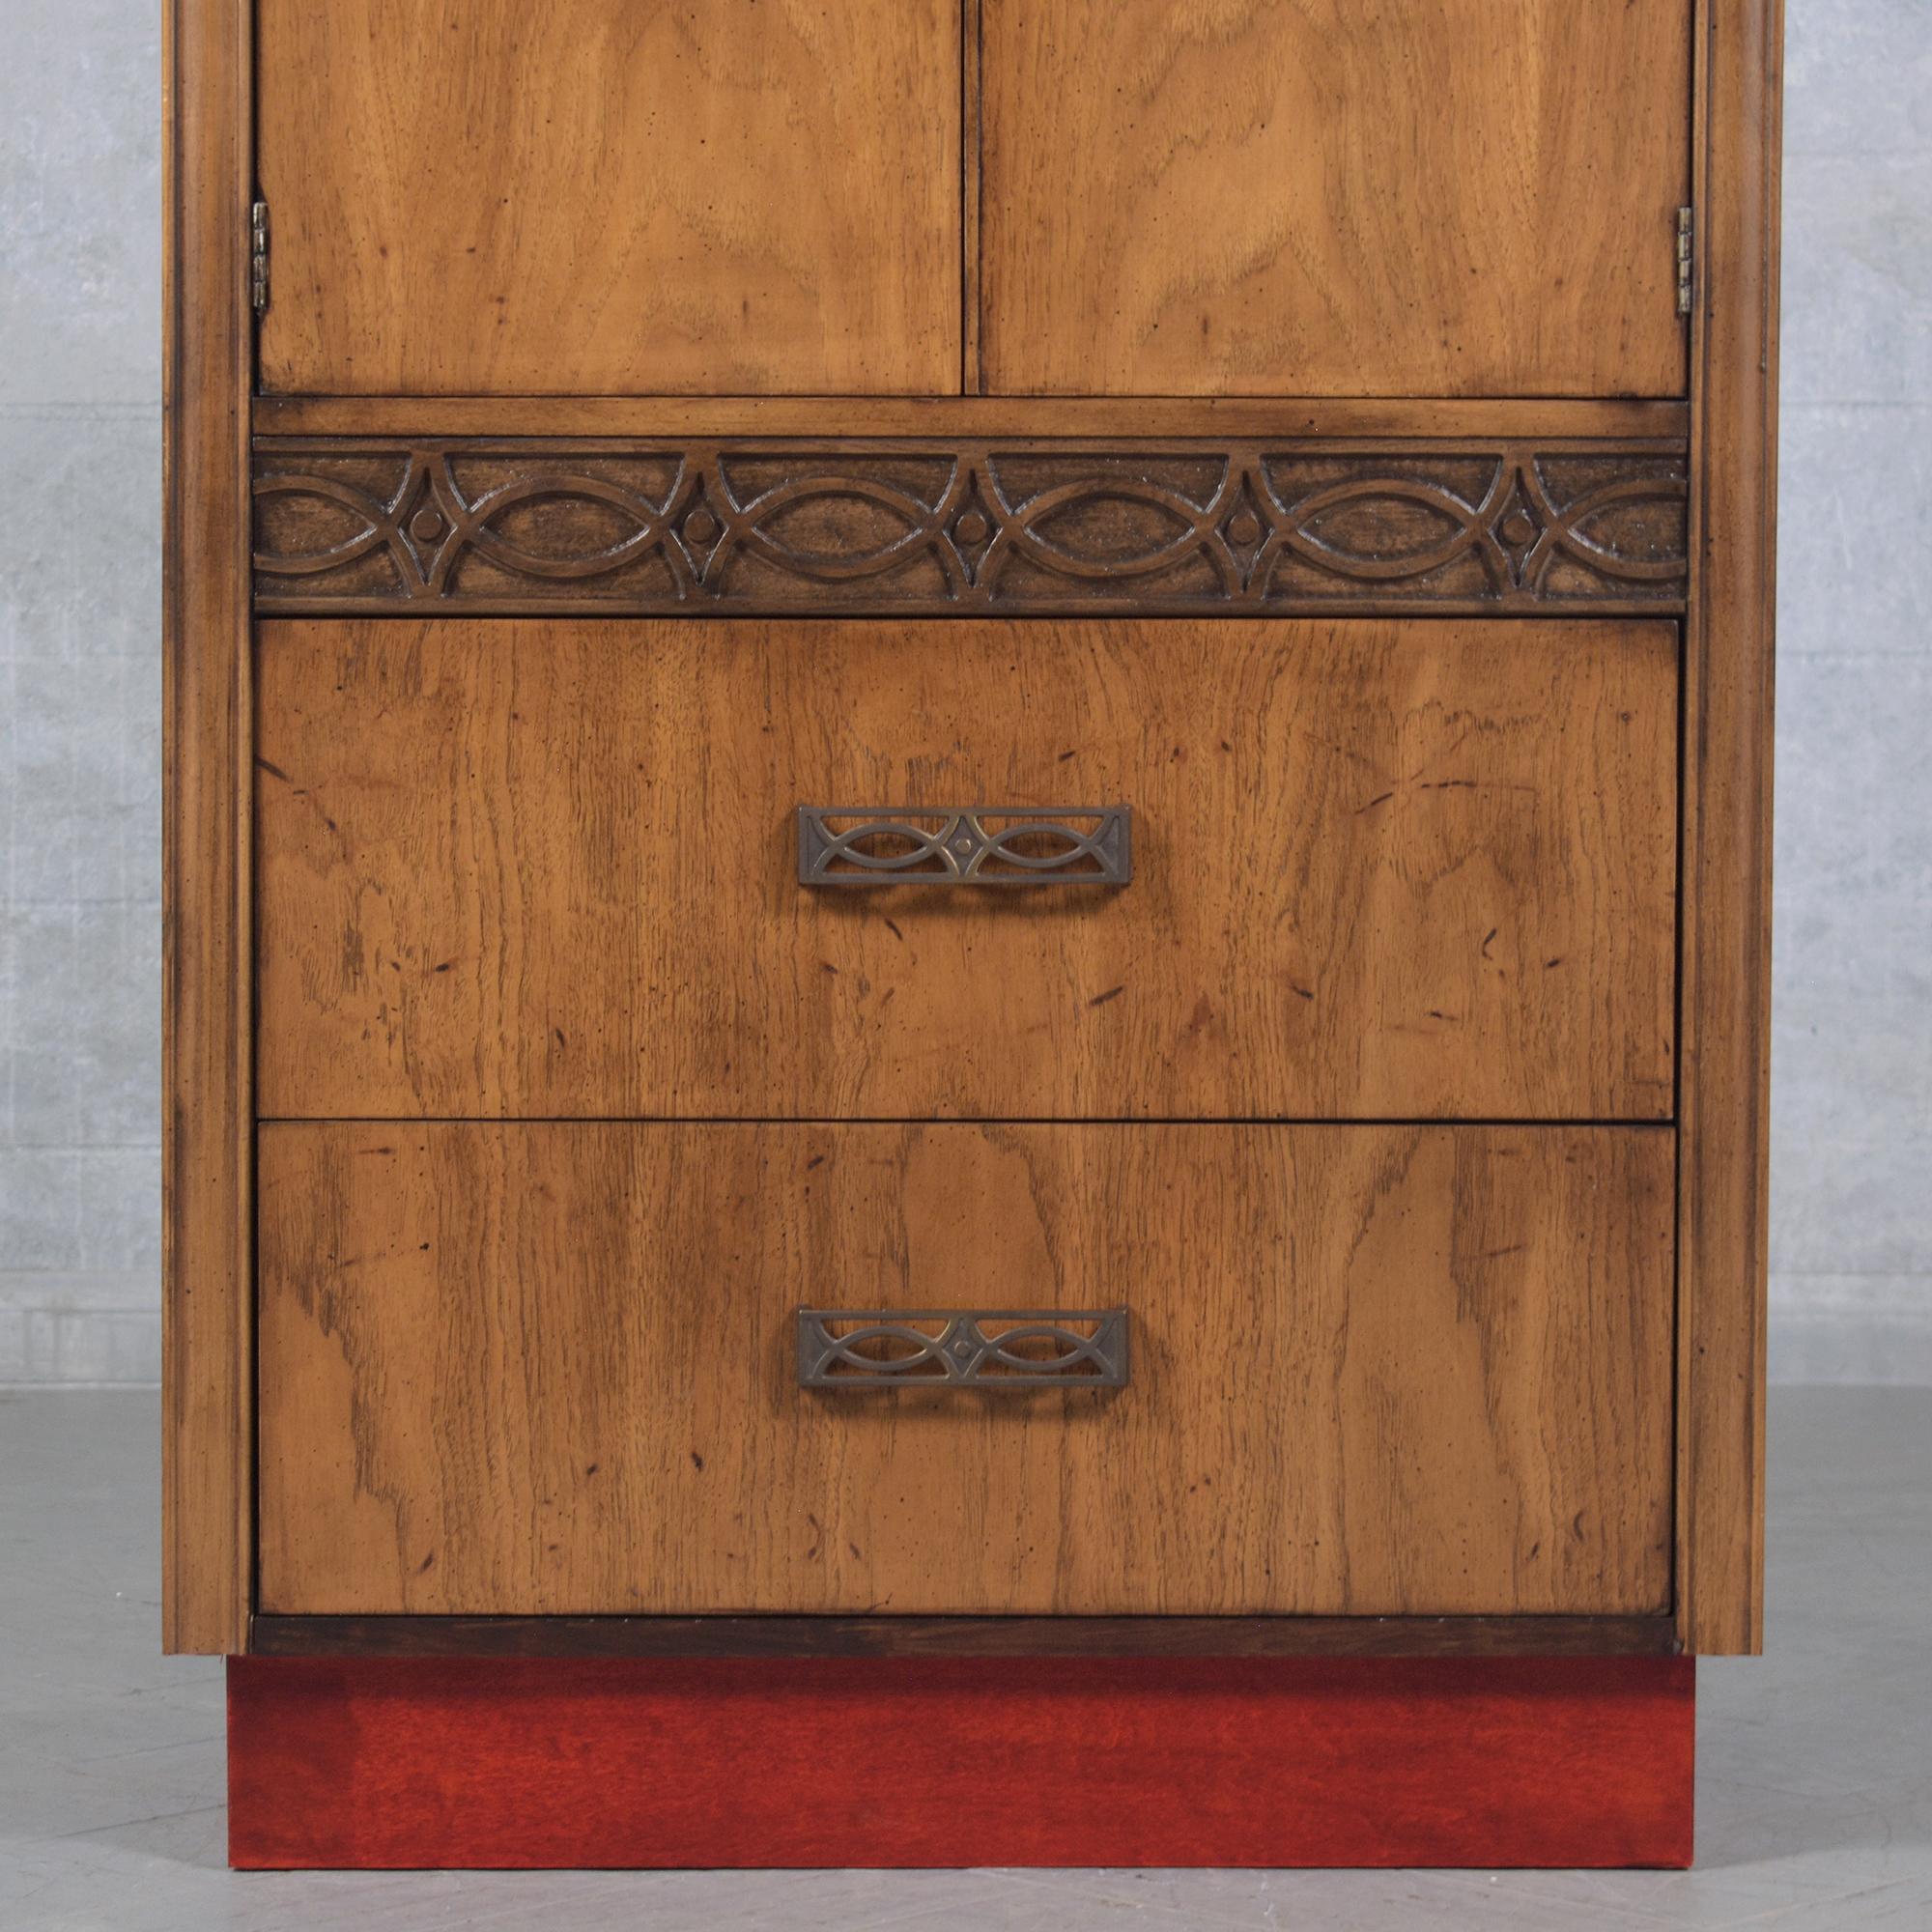 Stunning 1960s Mid-Century Modern Walnut Bachelor Chest with Sculpted Details For Sale 2